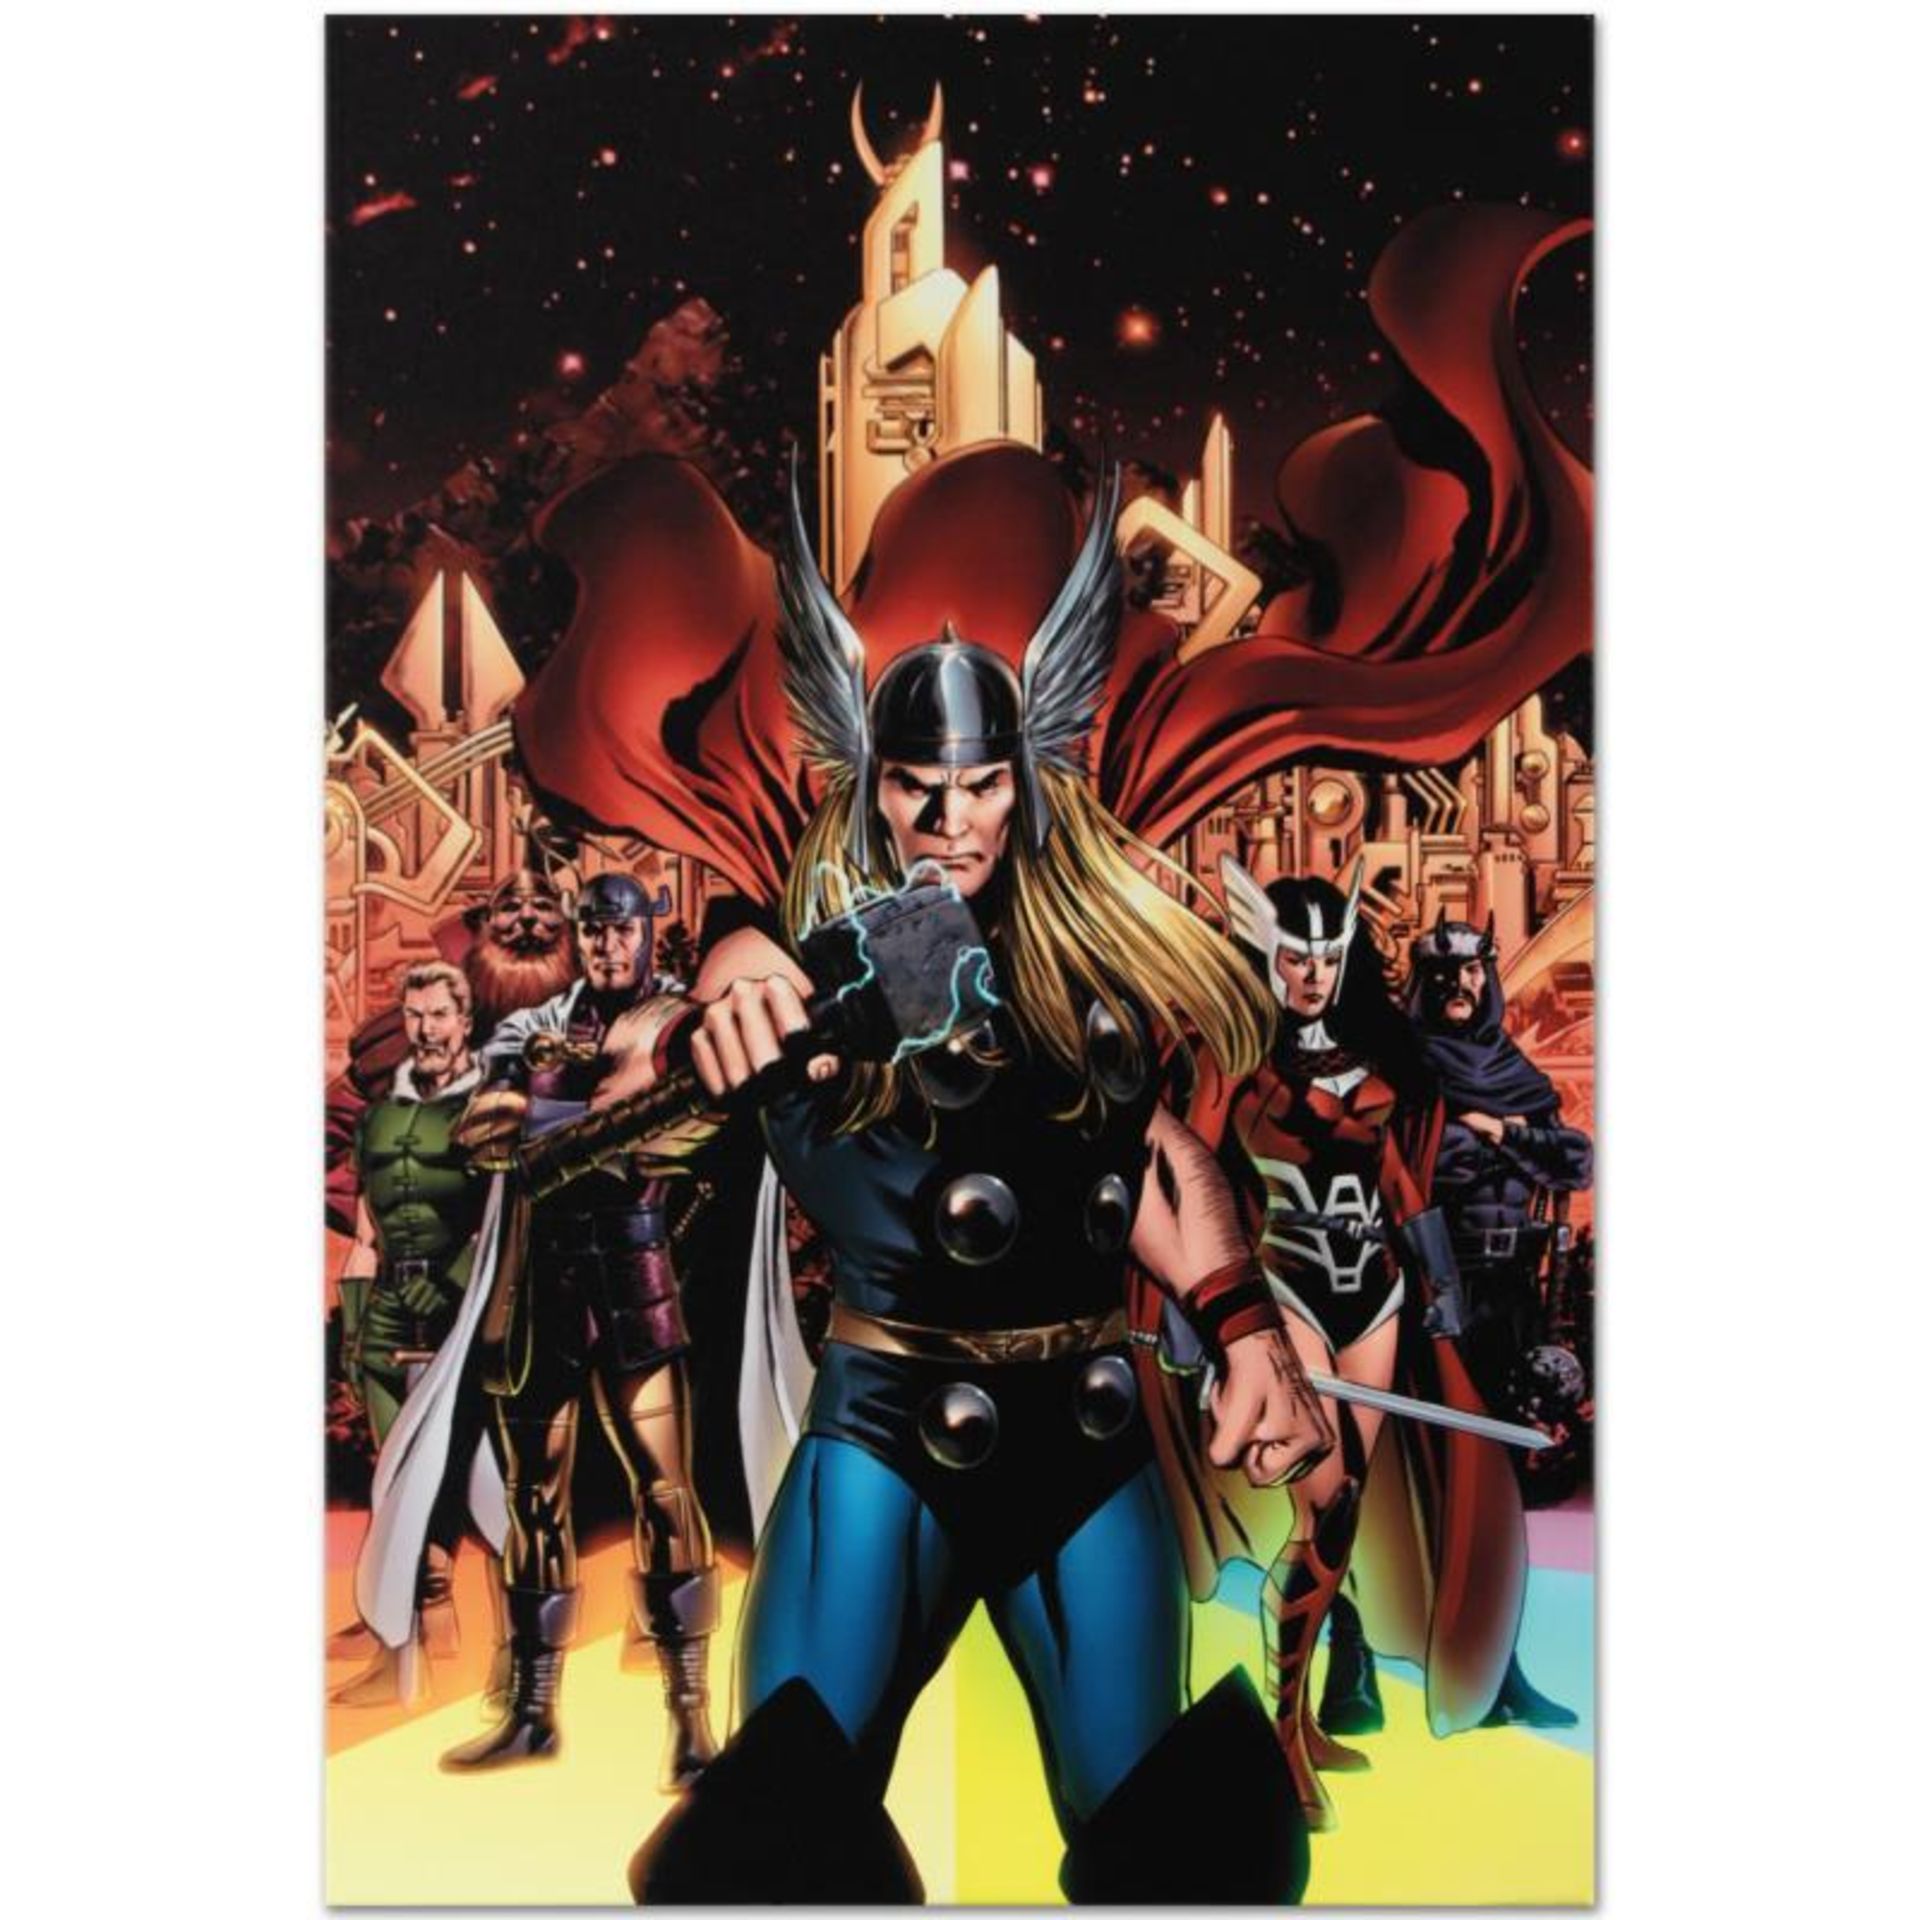 Marvel Comics "Thor #82" Numbered Limited Edition Giclee on Canvas by Steve Epti